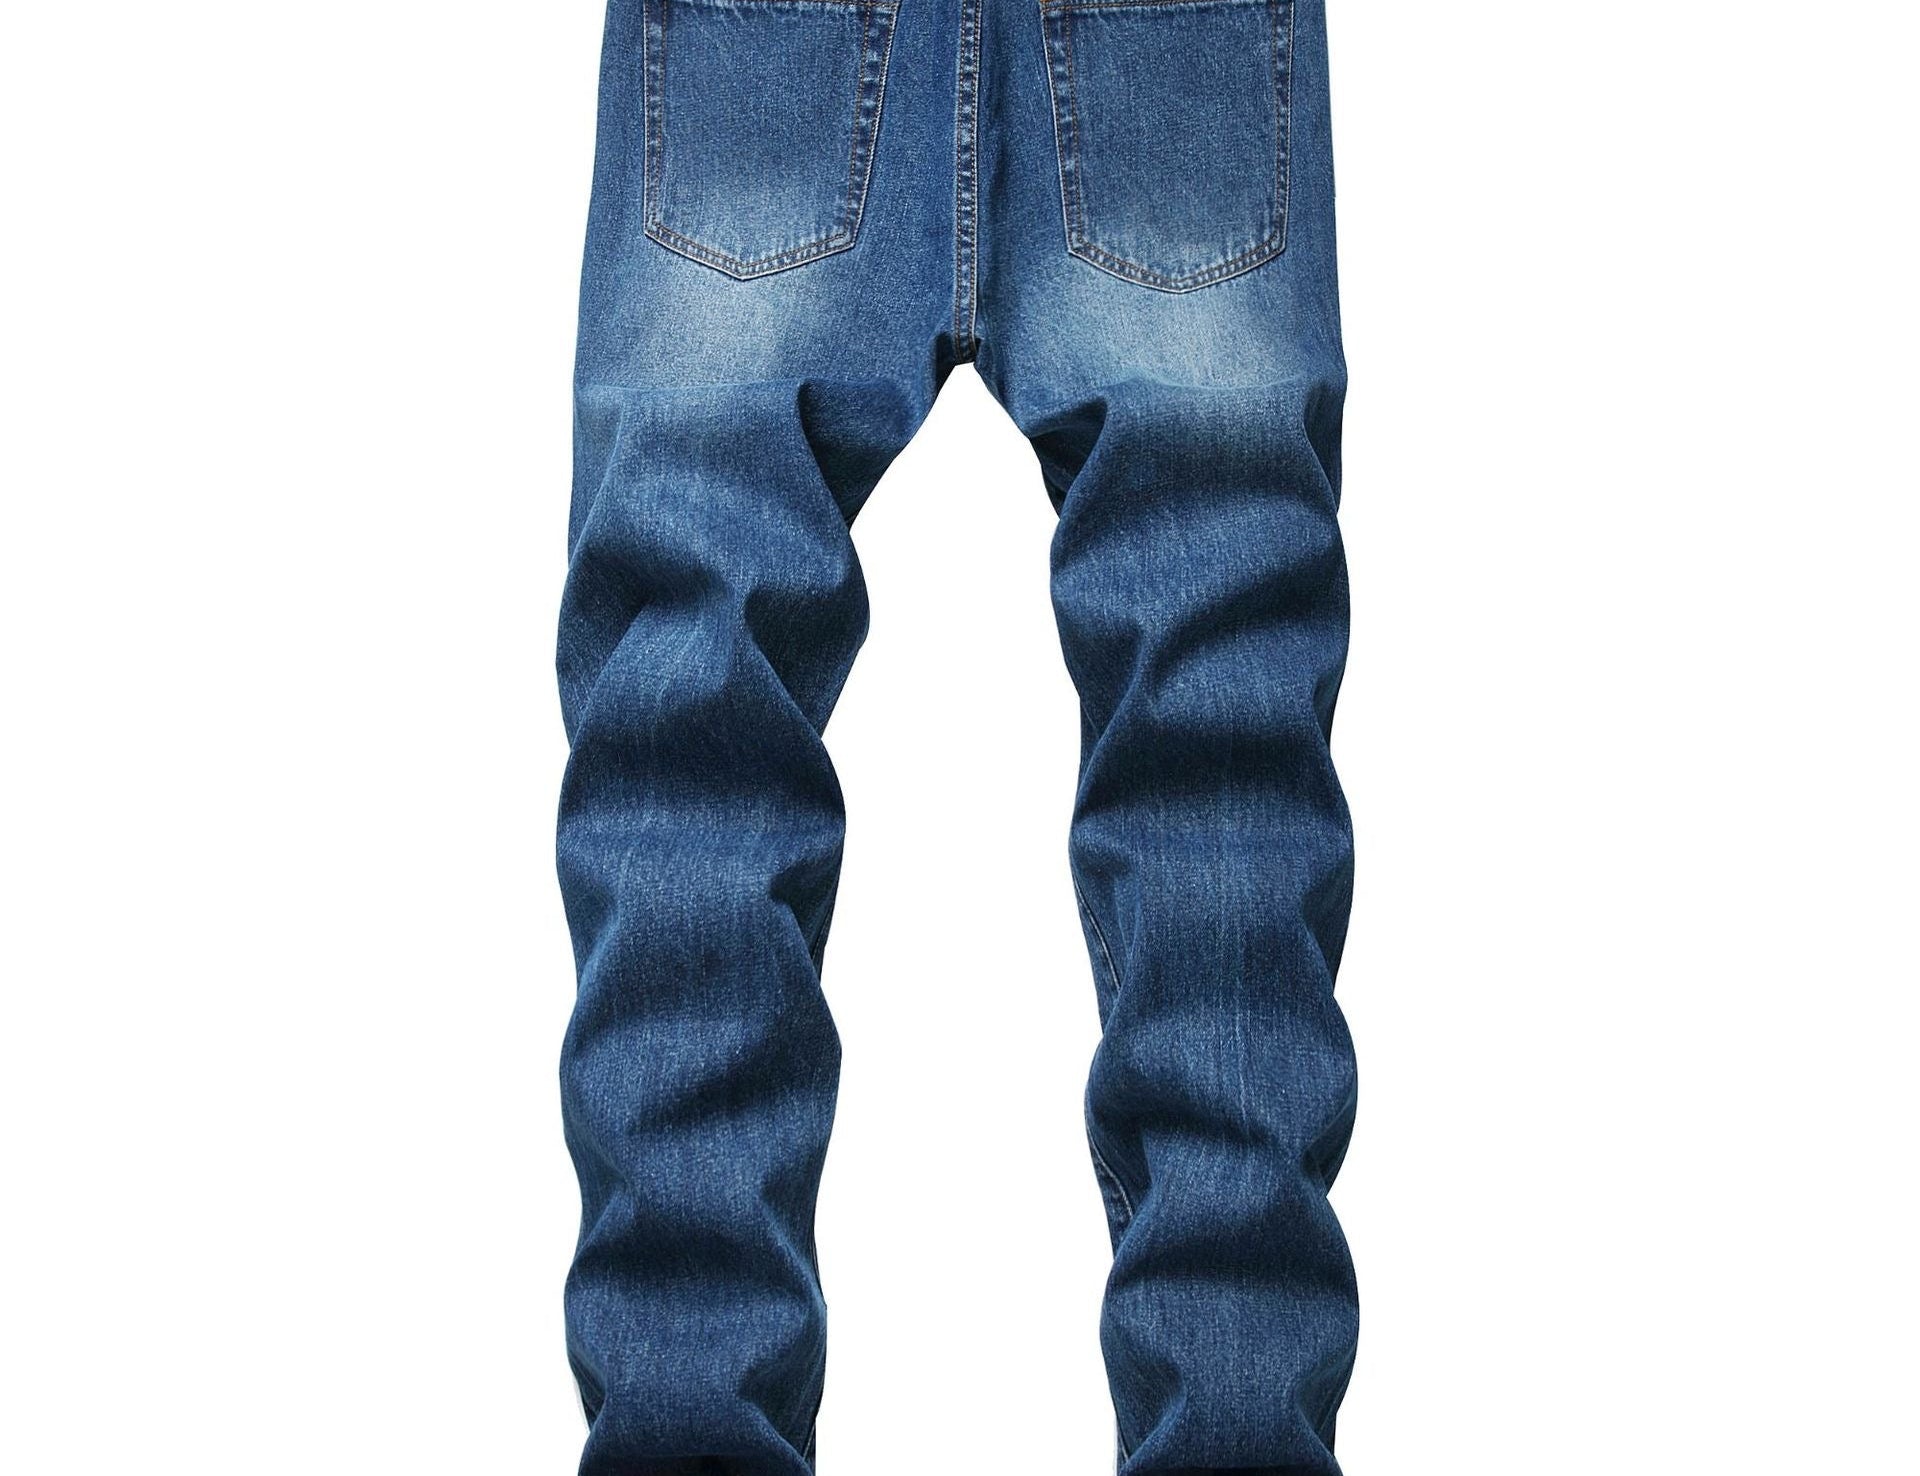 PPTI - Denim Jeans for Men - Sarman Fashion - Wholesale Clothing Fashion Brand for Men from Canada